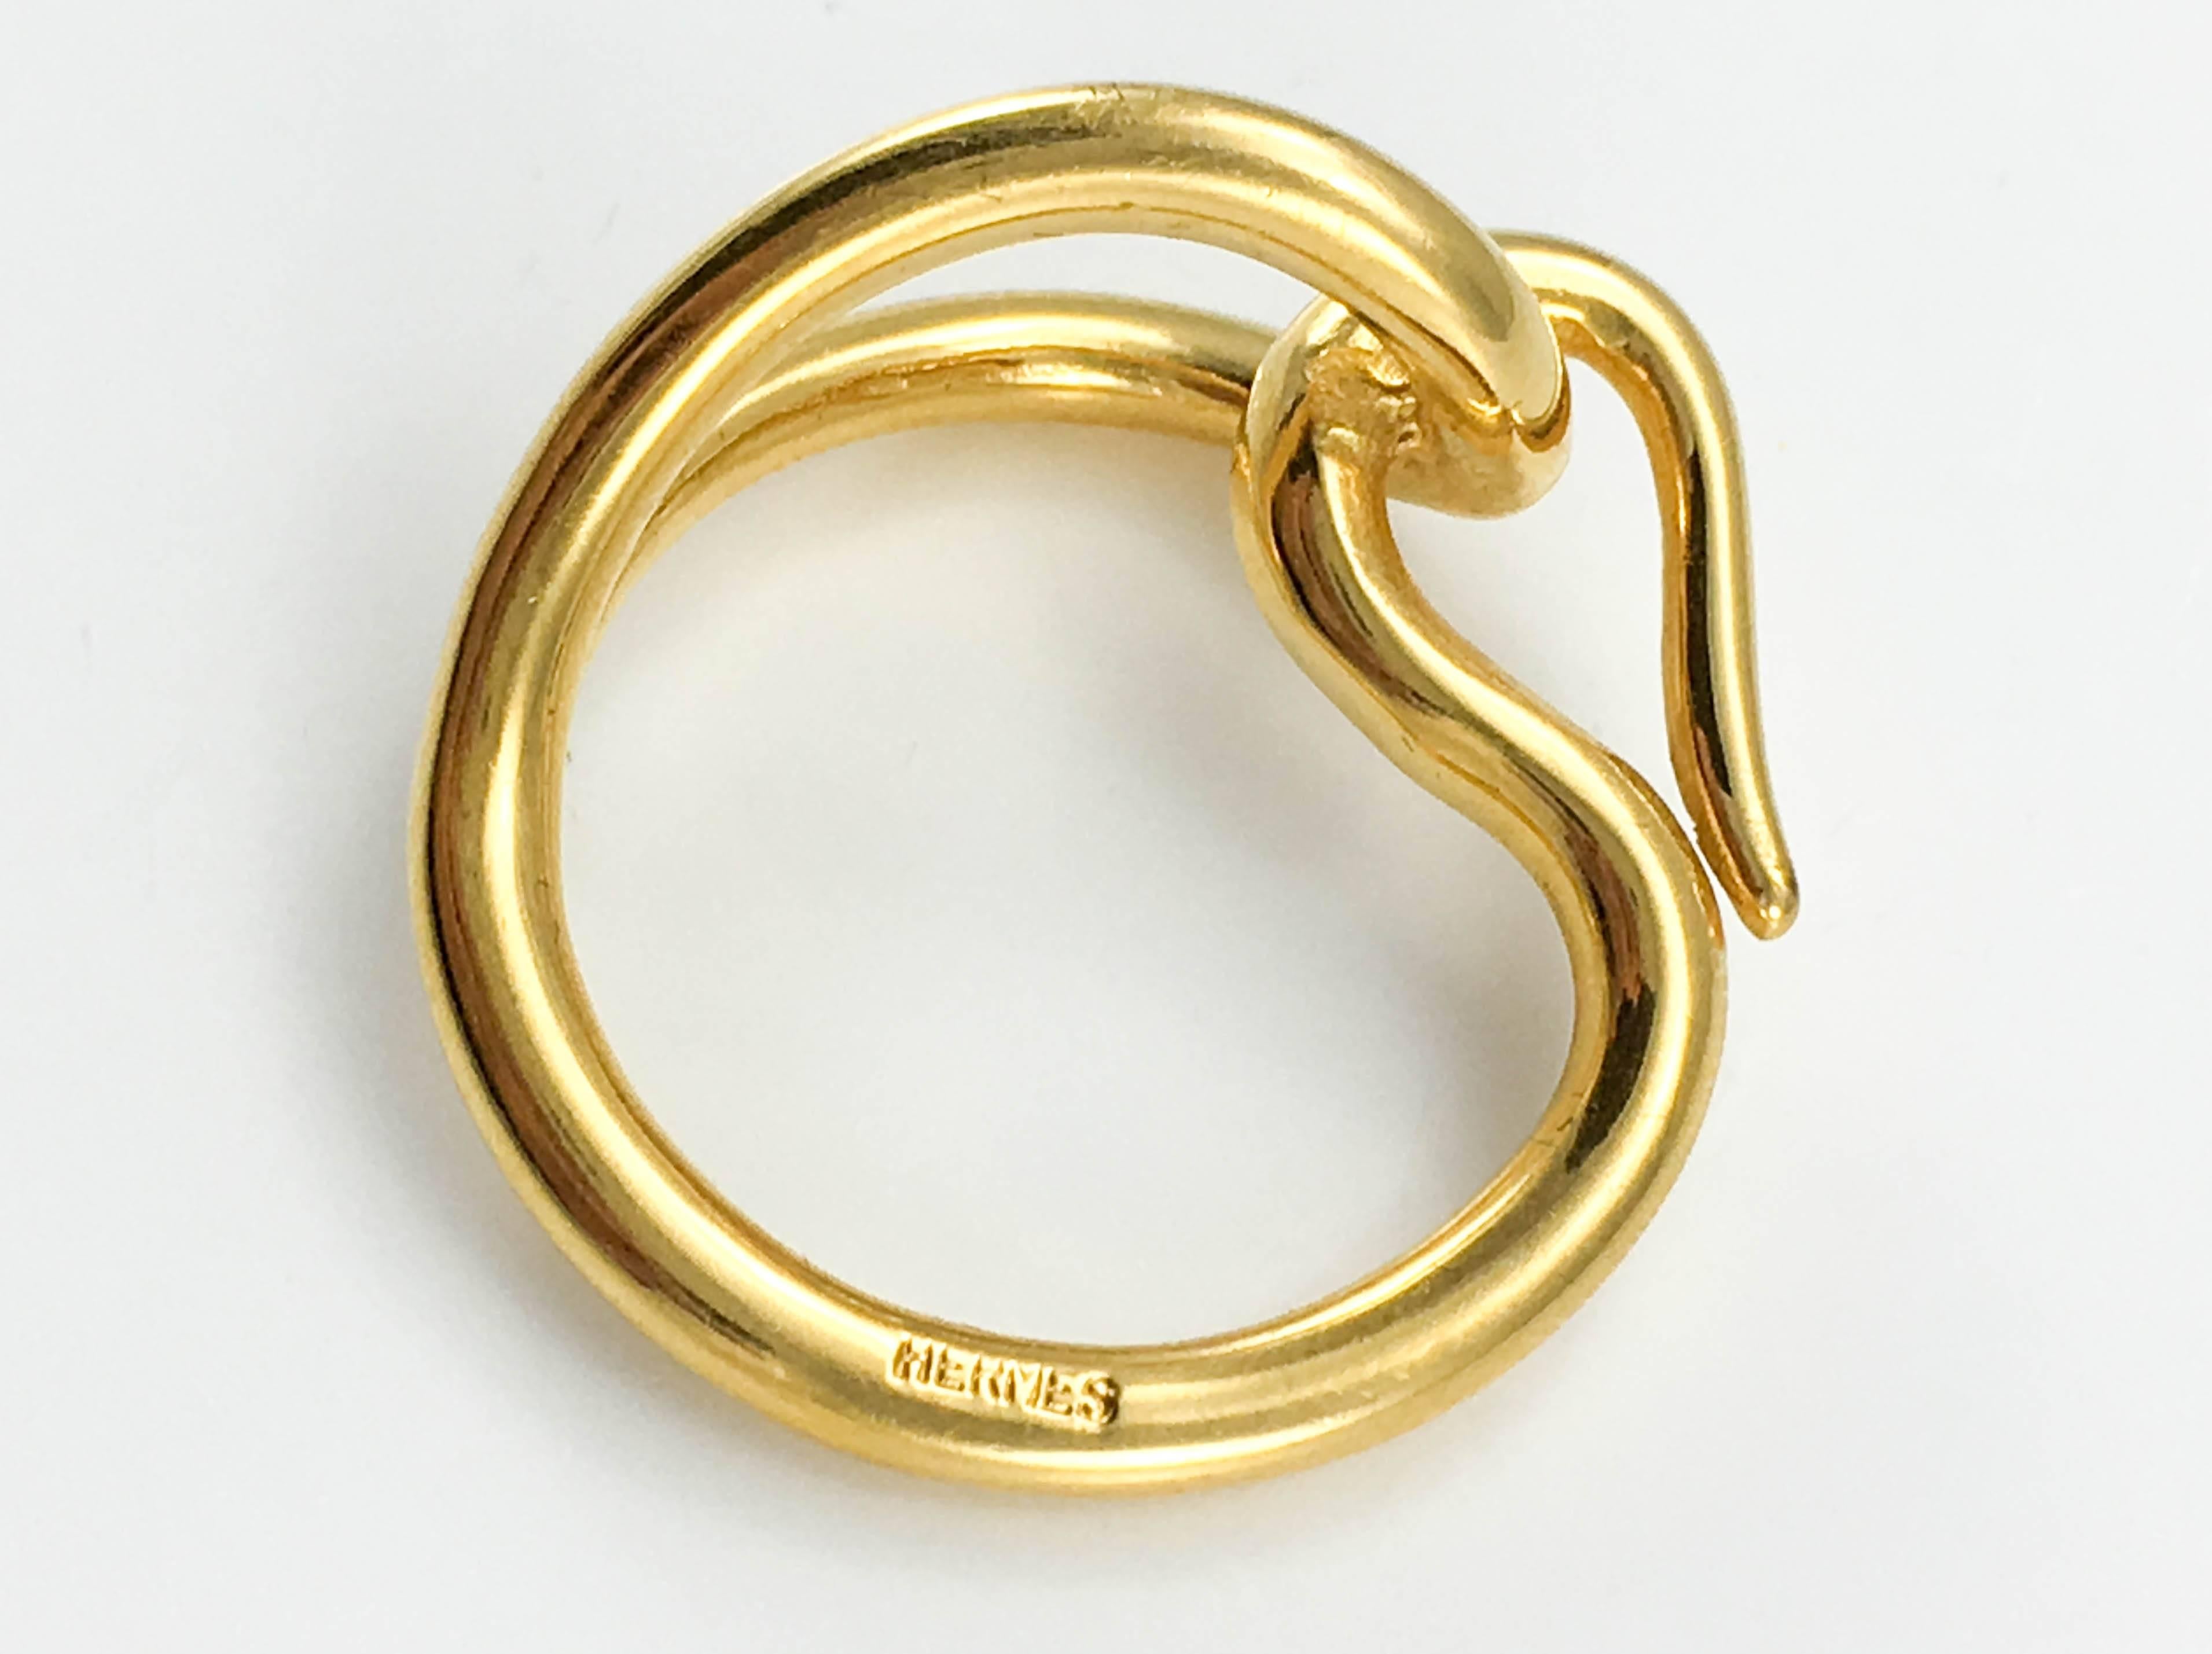 Really stylish Hermes Scarf Ring. This is a beautiful design by Hermes, with very clean and elegant lines. This is one of those small details that will elevate any look. Hermes signed.

Designer/Label: Hermes

Period: 21st Century

Origin: